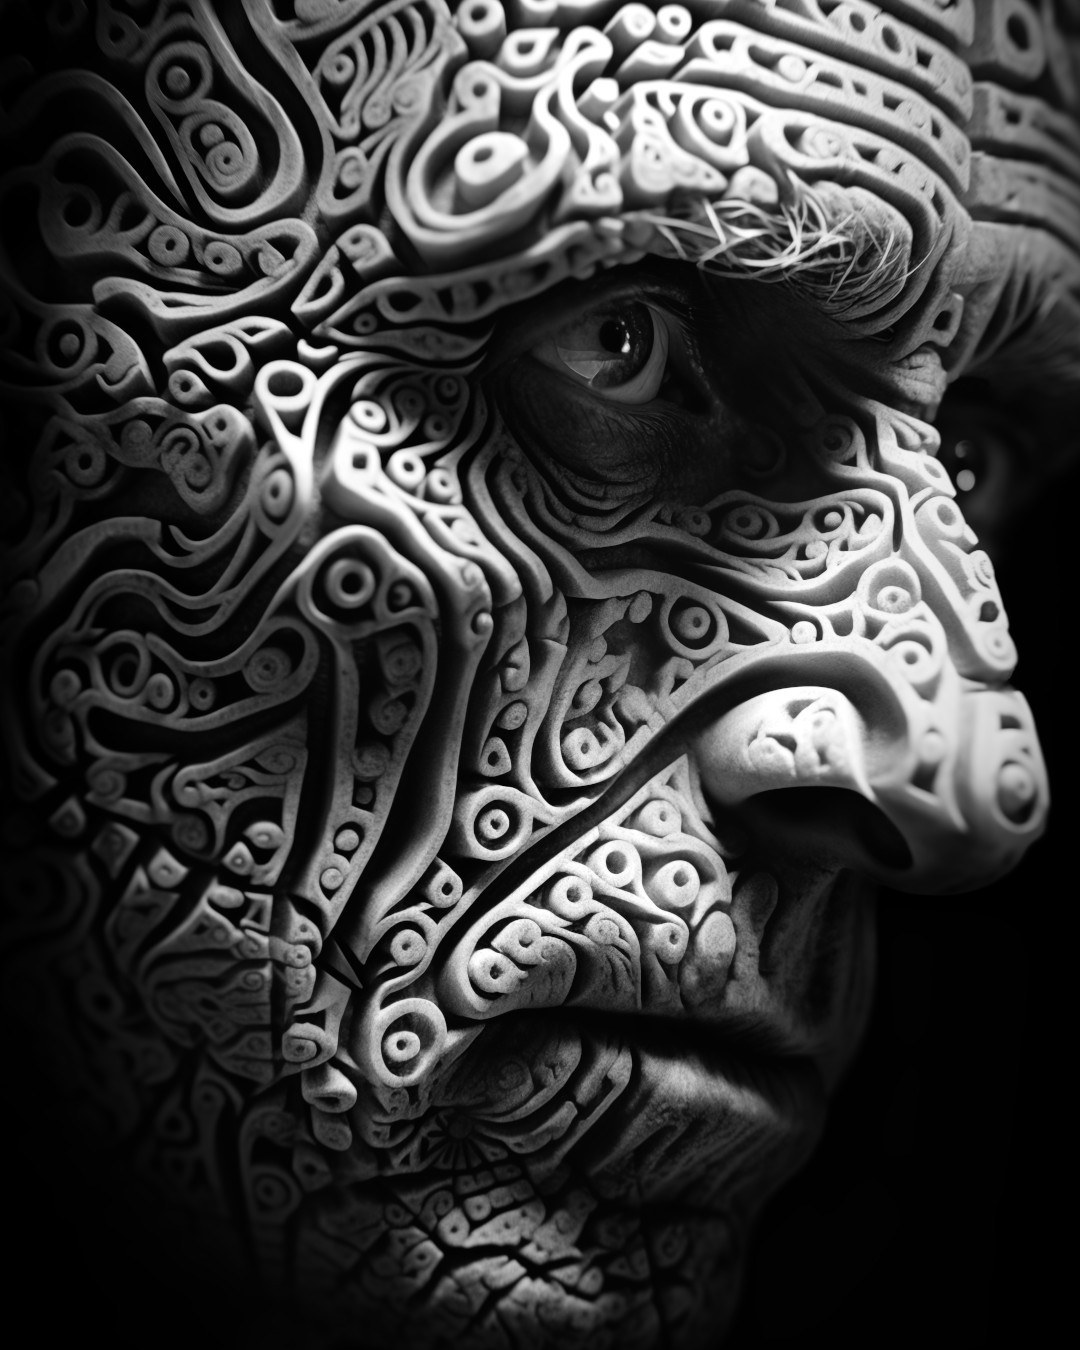 Carved face, intricate patterns, detailed monochrome